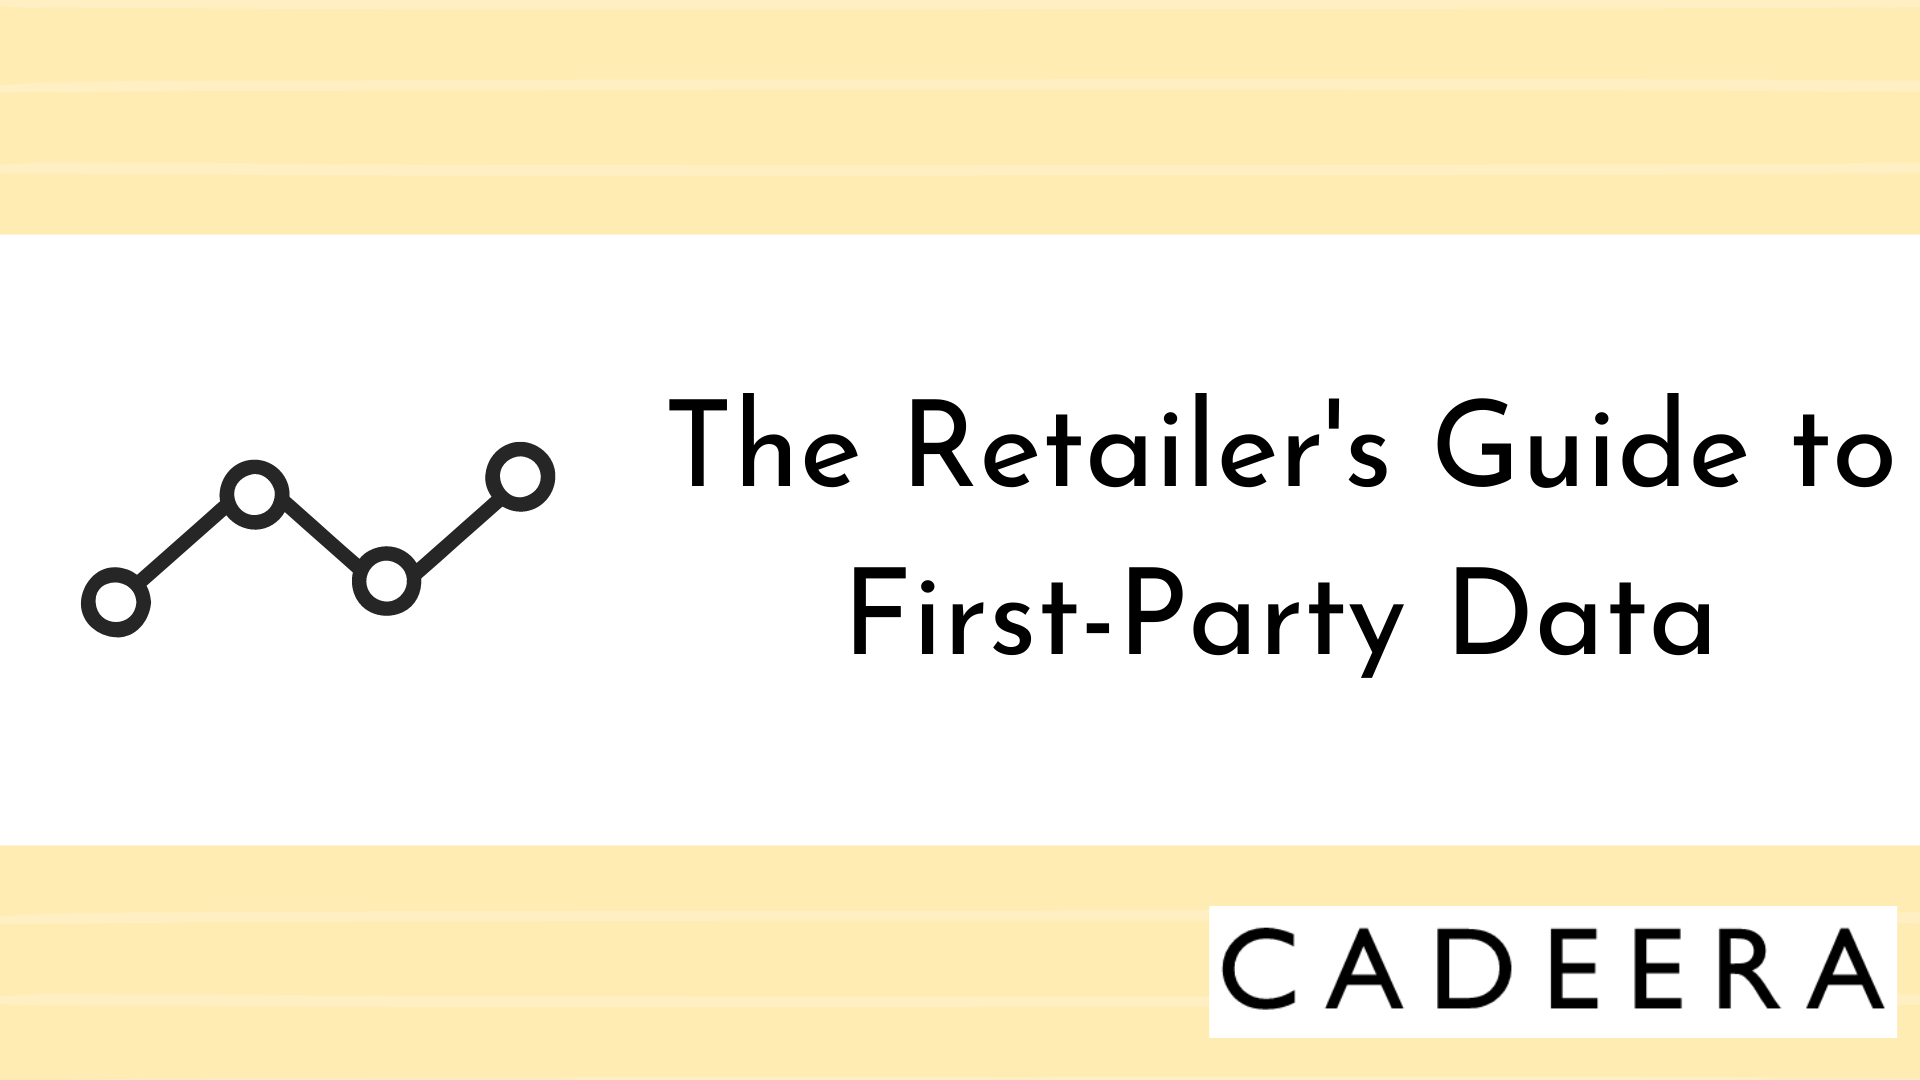 The Retailer's Guide to First-Party Data